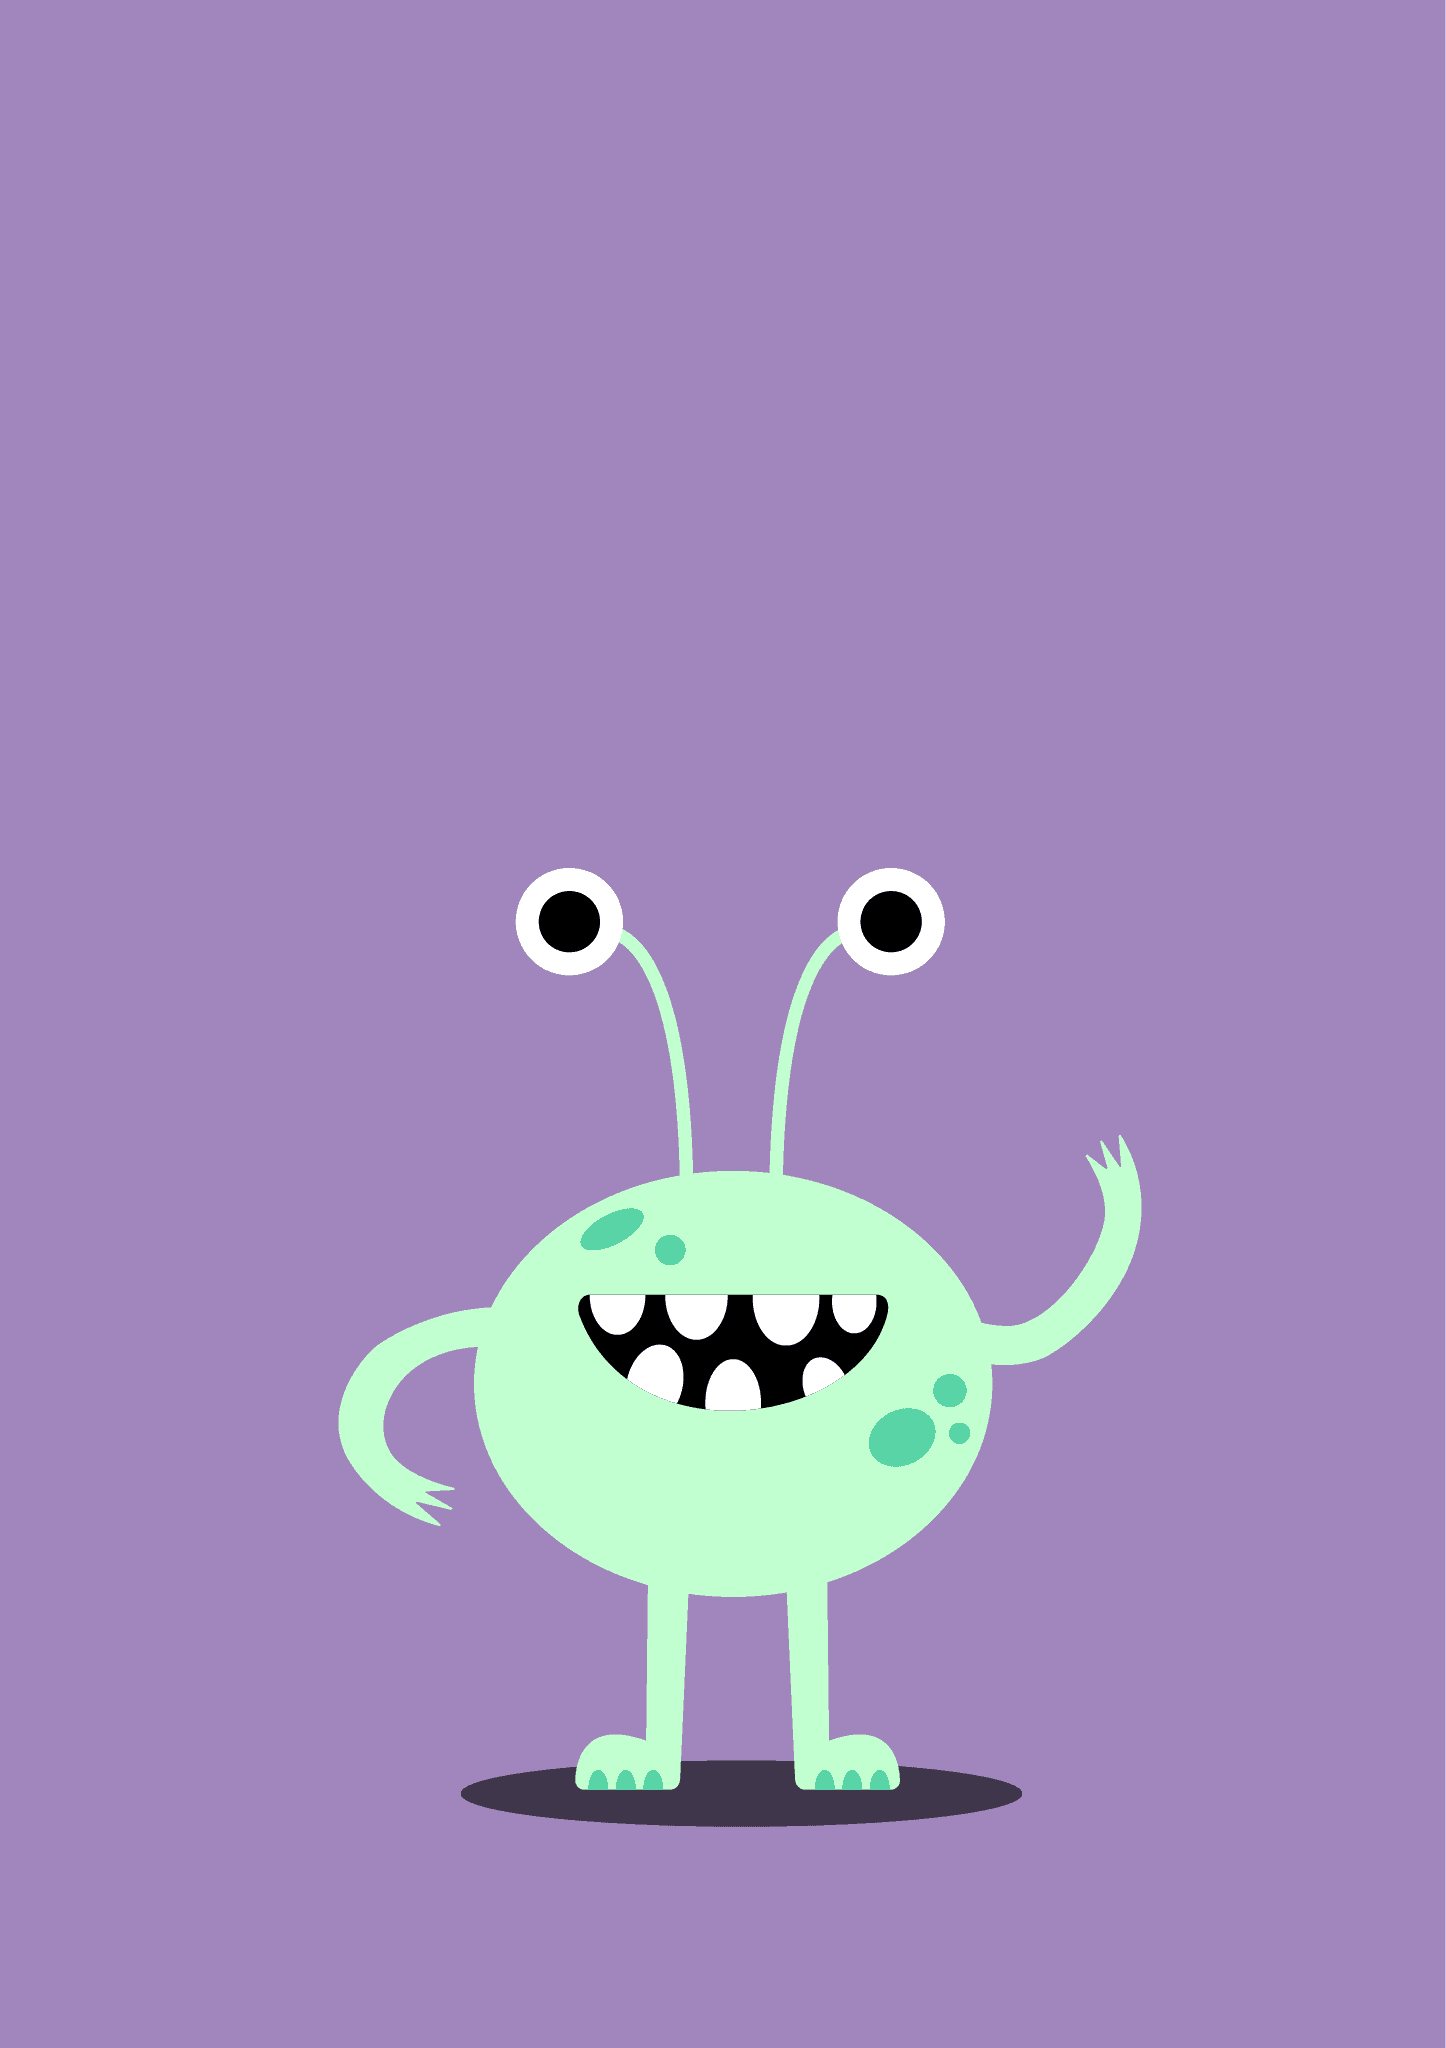 Vector illustration of a short green alien with a big smile and some darker spots throughout his round body.